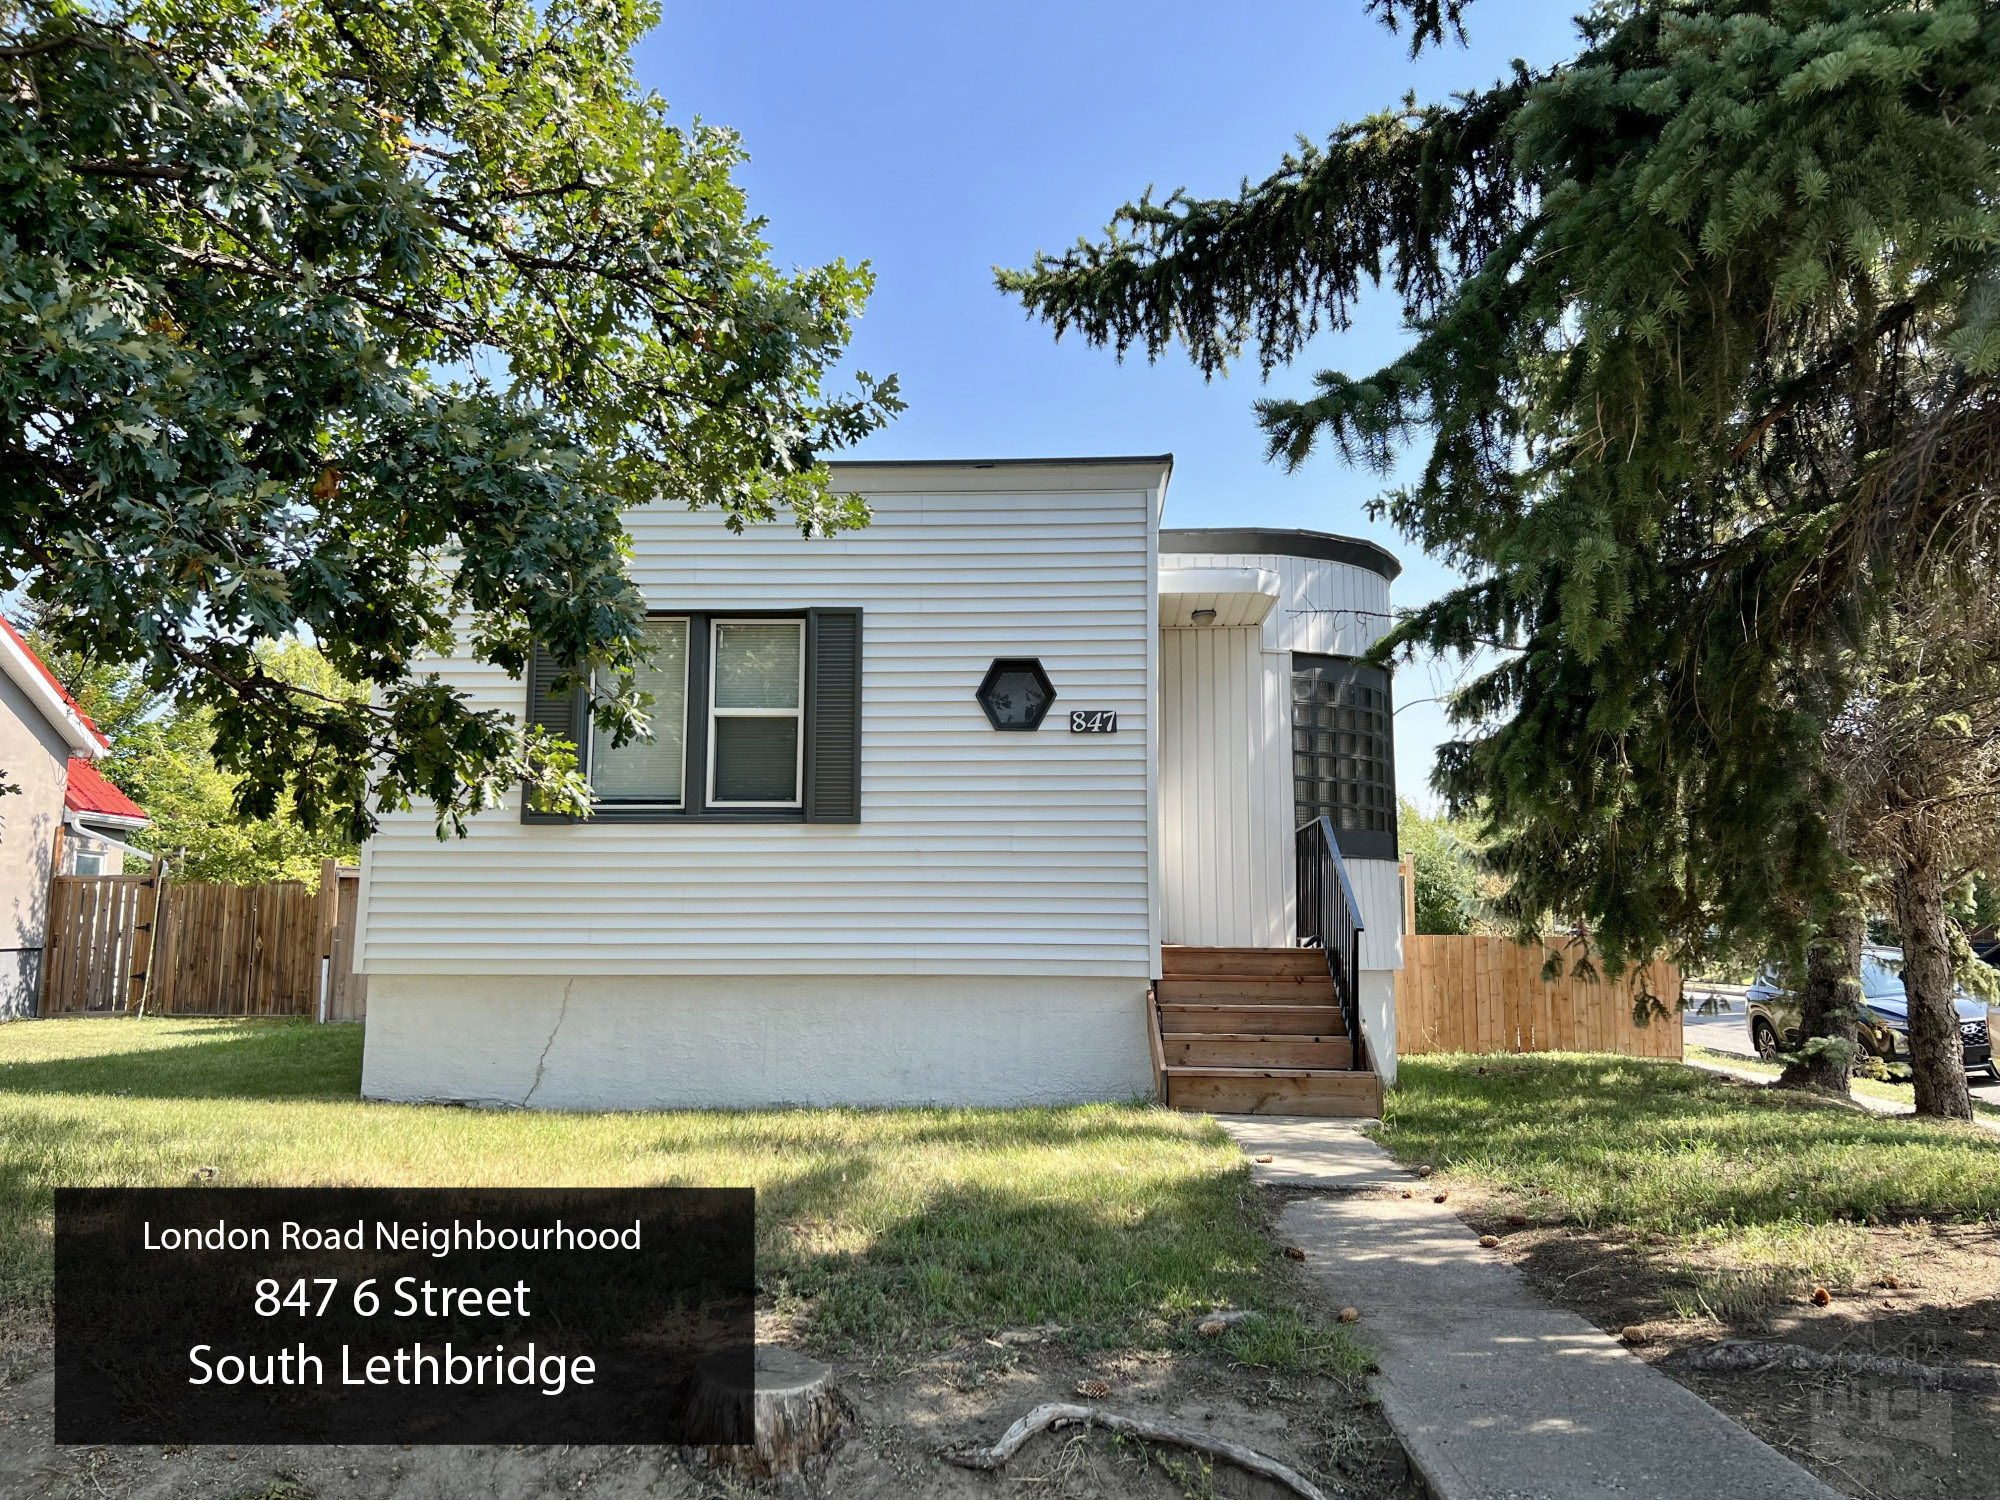 847 6 Street South Lethbridge (Lower Suite) Cover image